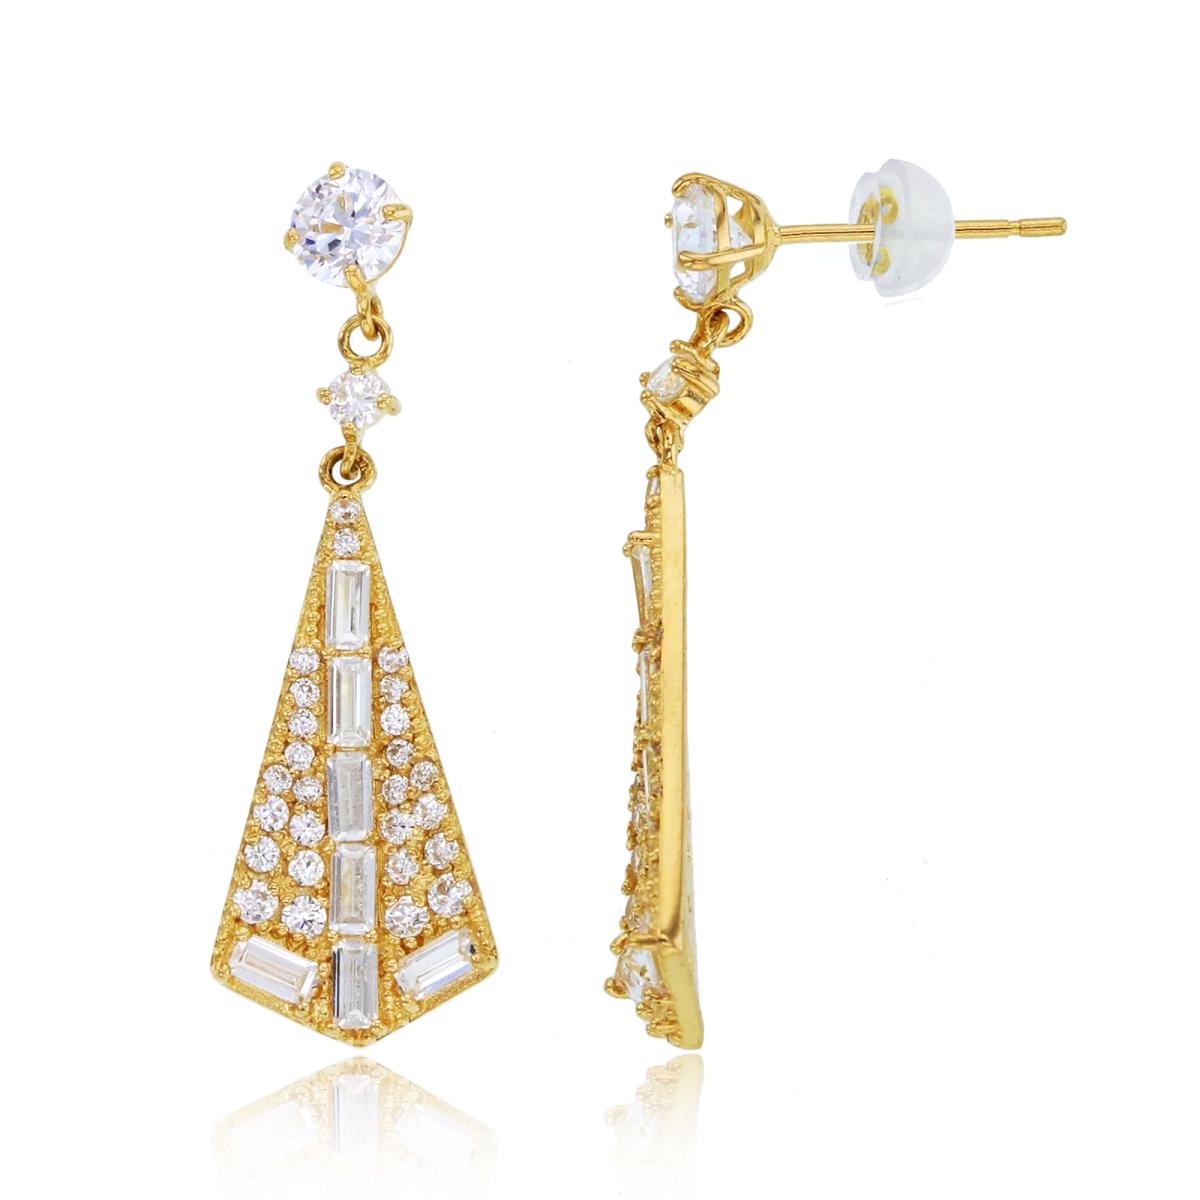 14K Yellow Gold Rnd & SB CZ Chandelier Earrings with Silicon Backs